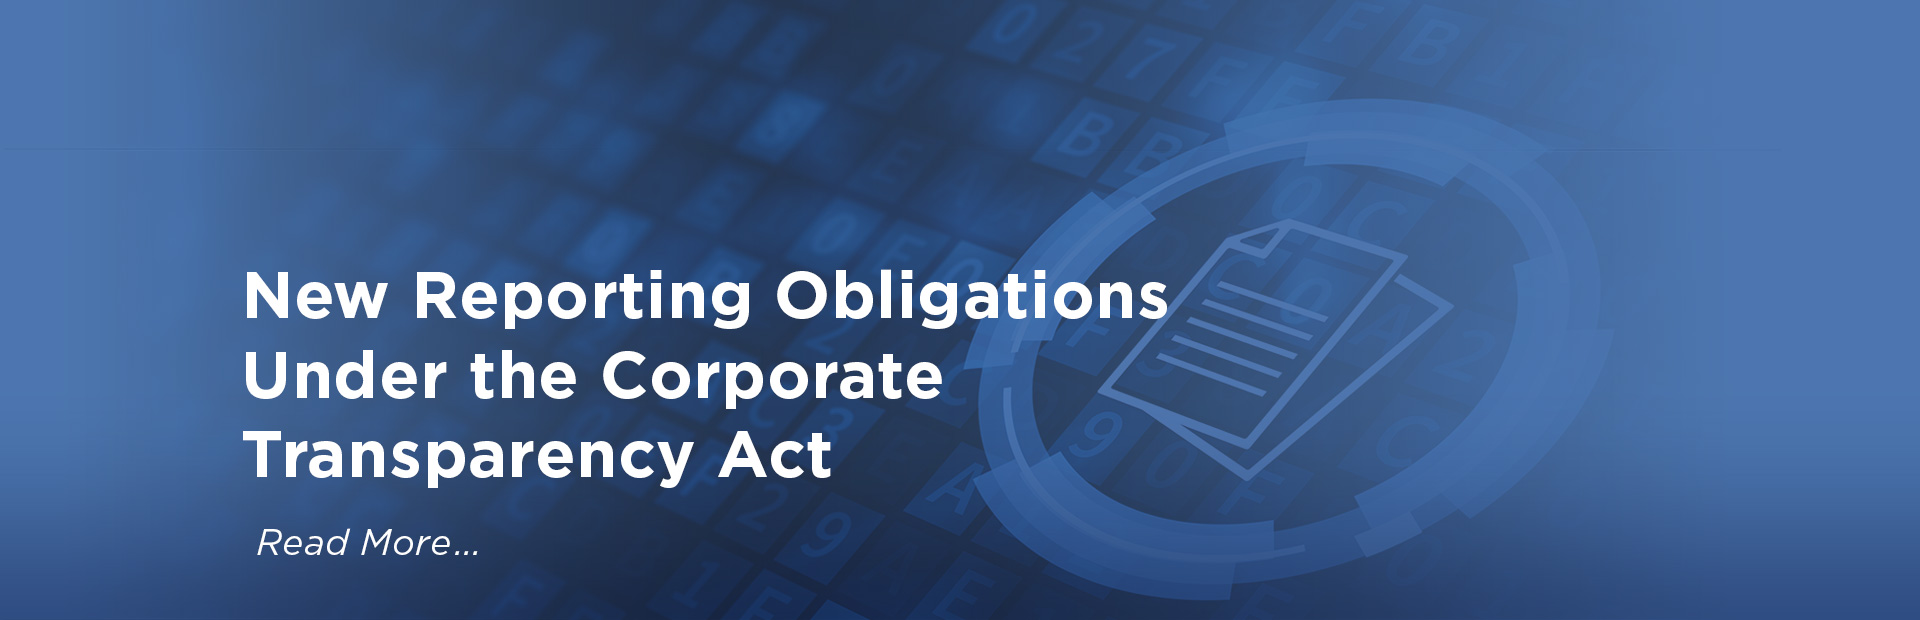 Image of document sharing new reporting obligations under the Corporate Transparency Act.